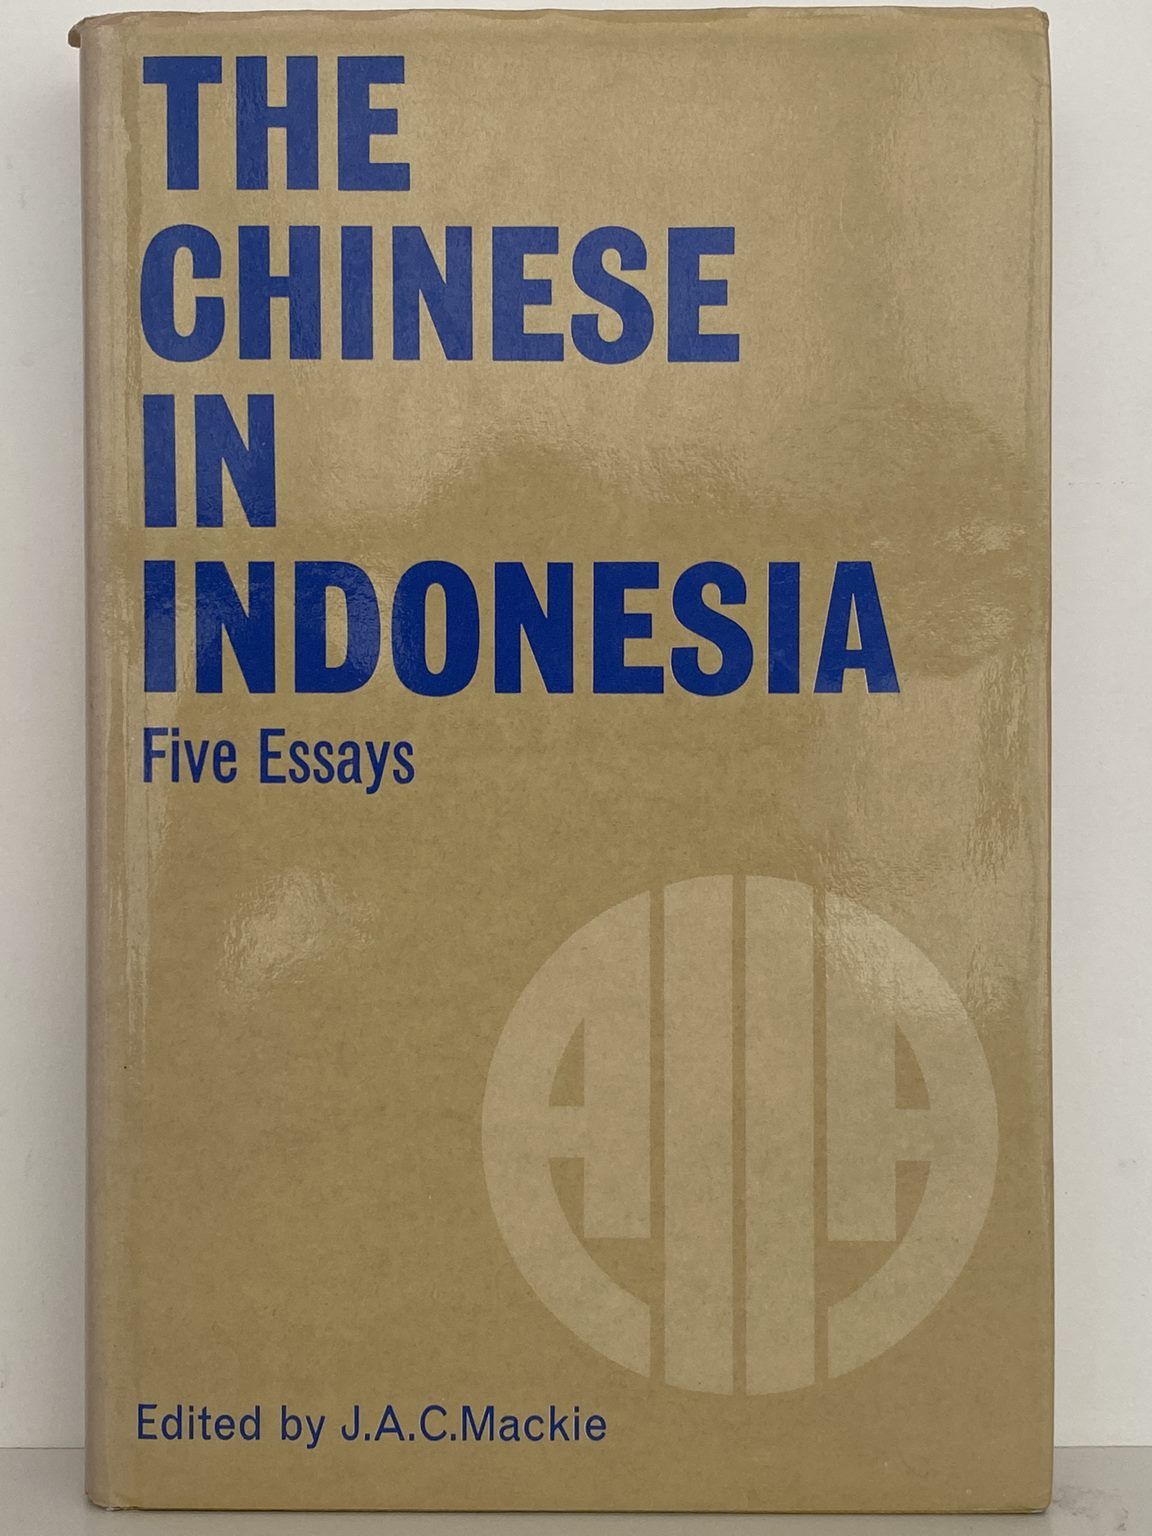 THE CHINESE IN INDONESIA: Five Essays